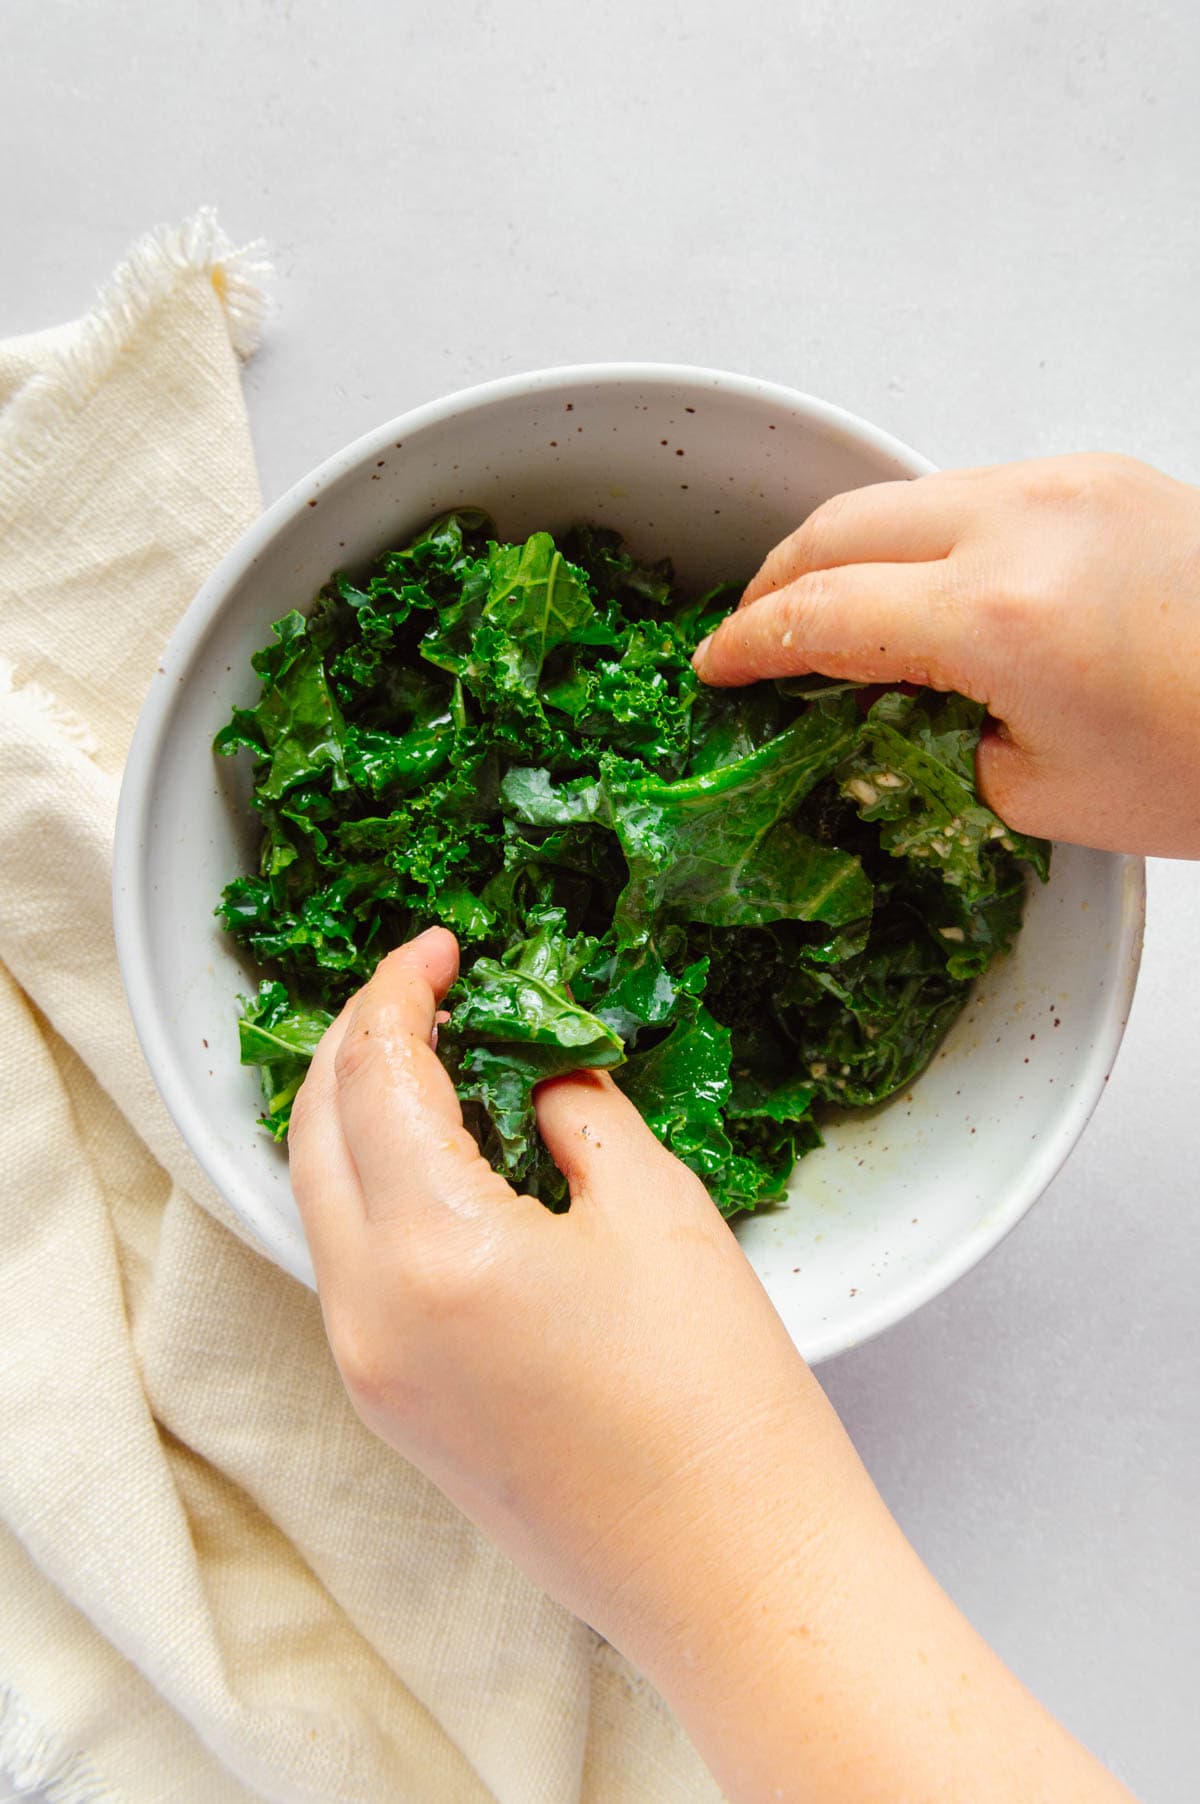 Hands massaging the salad dressing into curly kale.